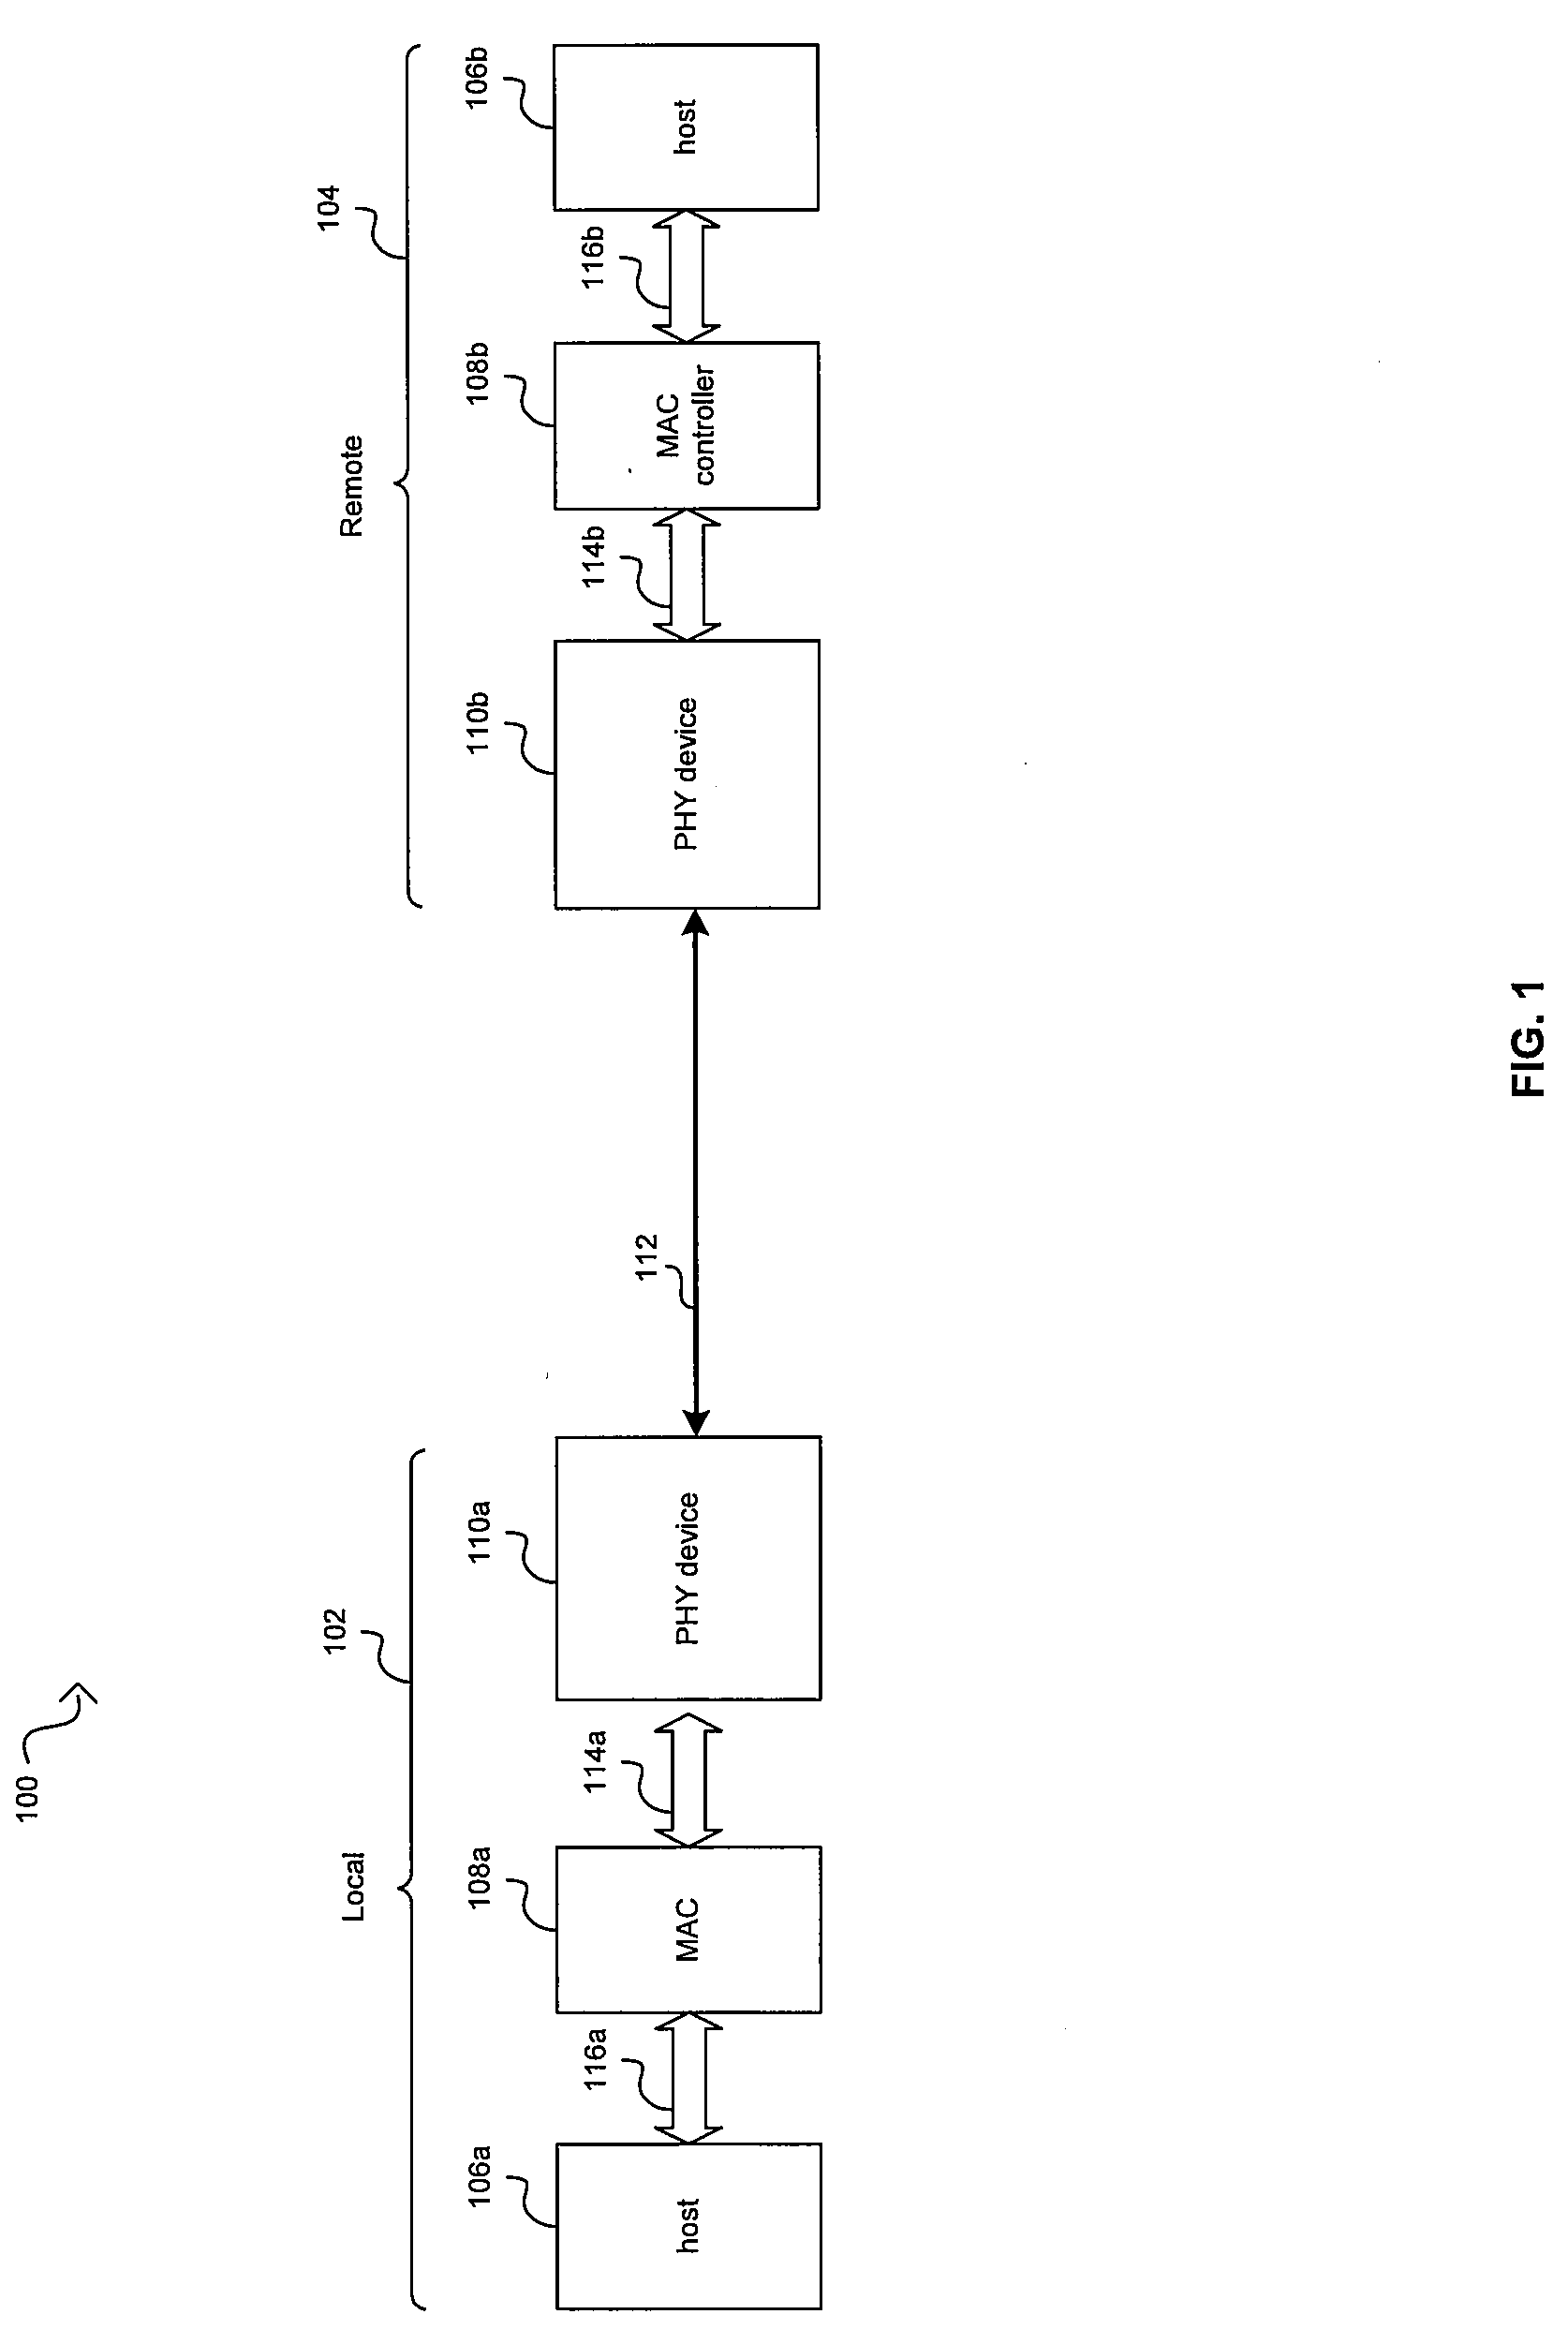 Method And System For Near Continuous Data Rate Limit Adjustment Via A Plurality Of Link Variables In An Energy Efficient Network